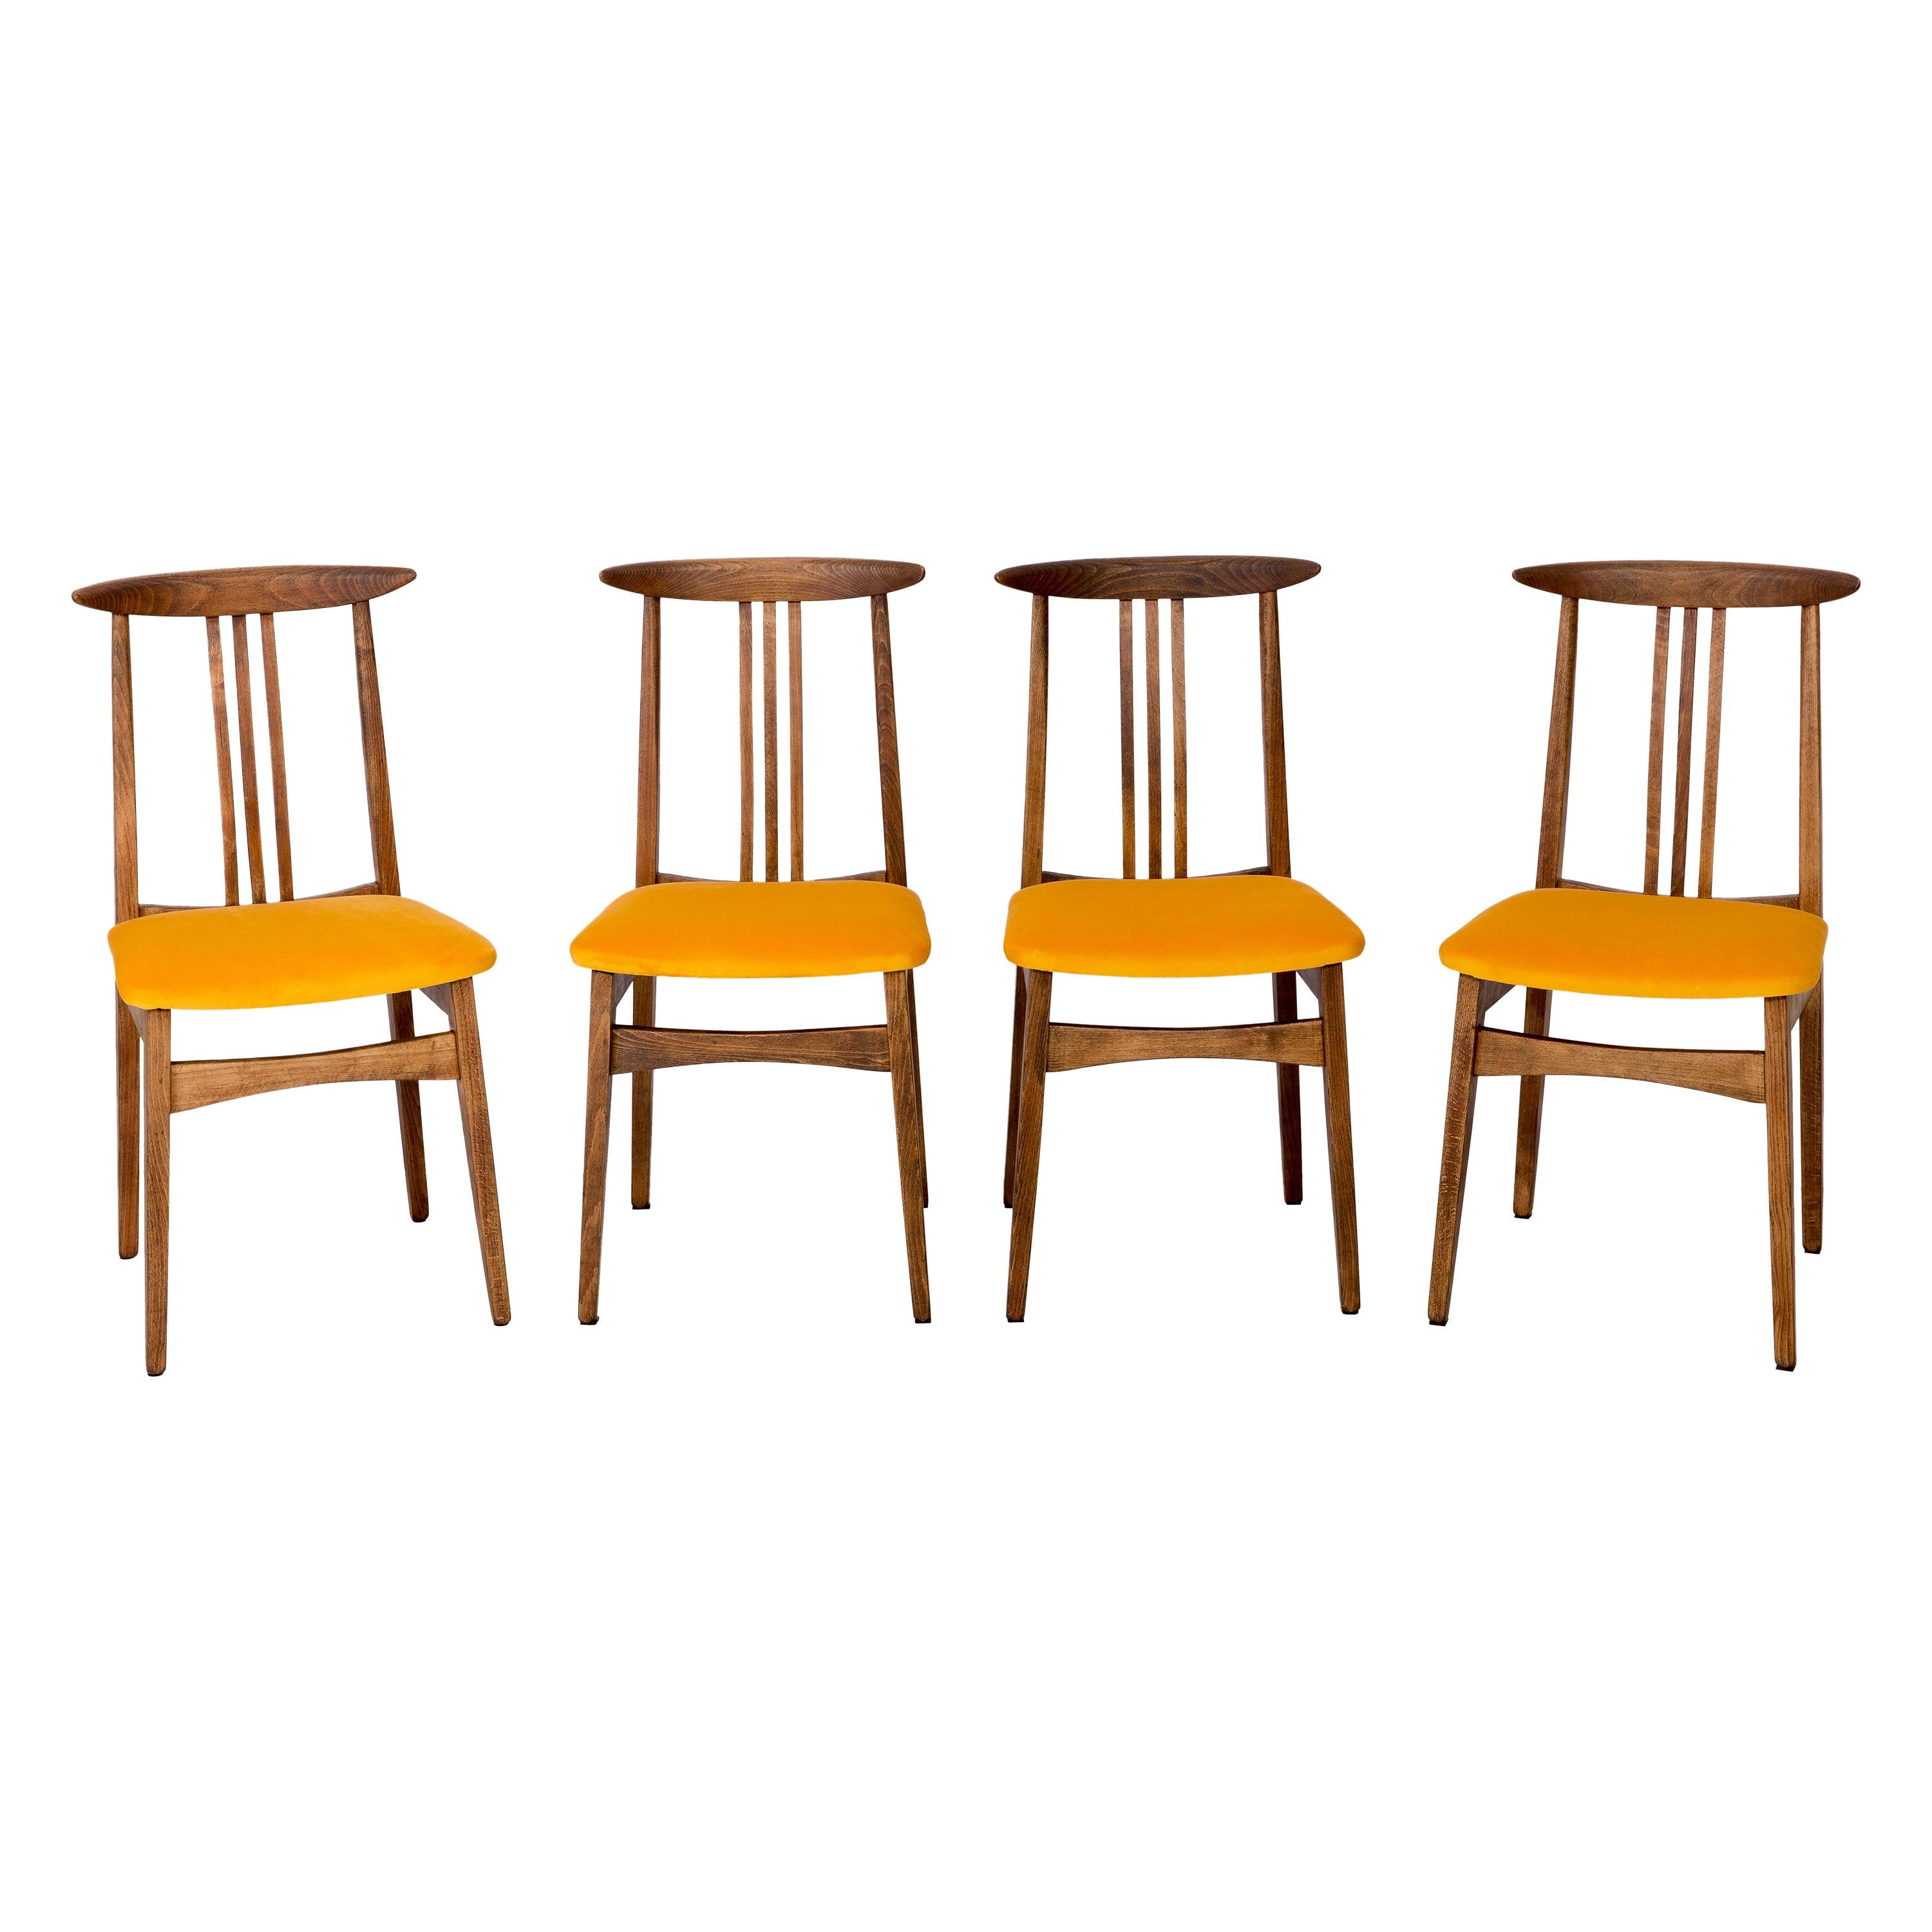 Set of Four Yellow Chairs, by Zielinski, Poland, 1960s For Sale